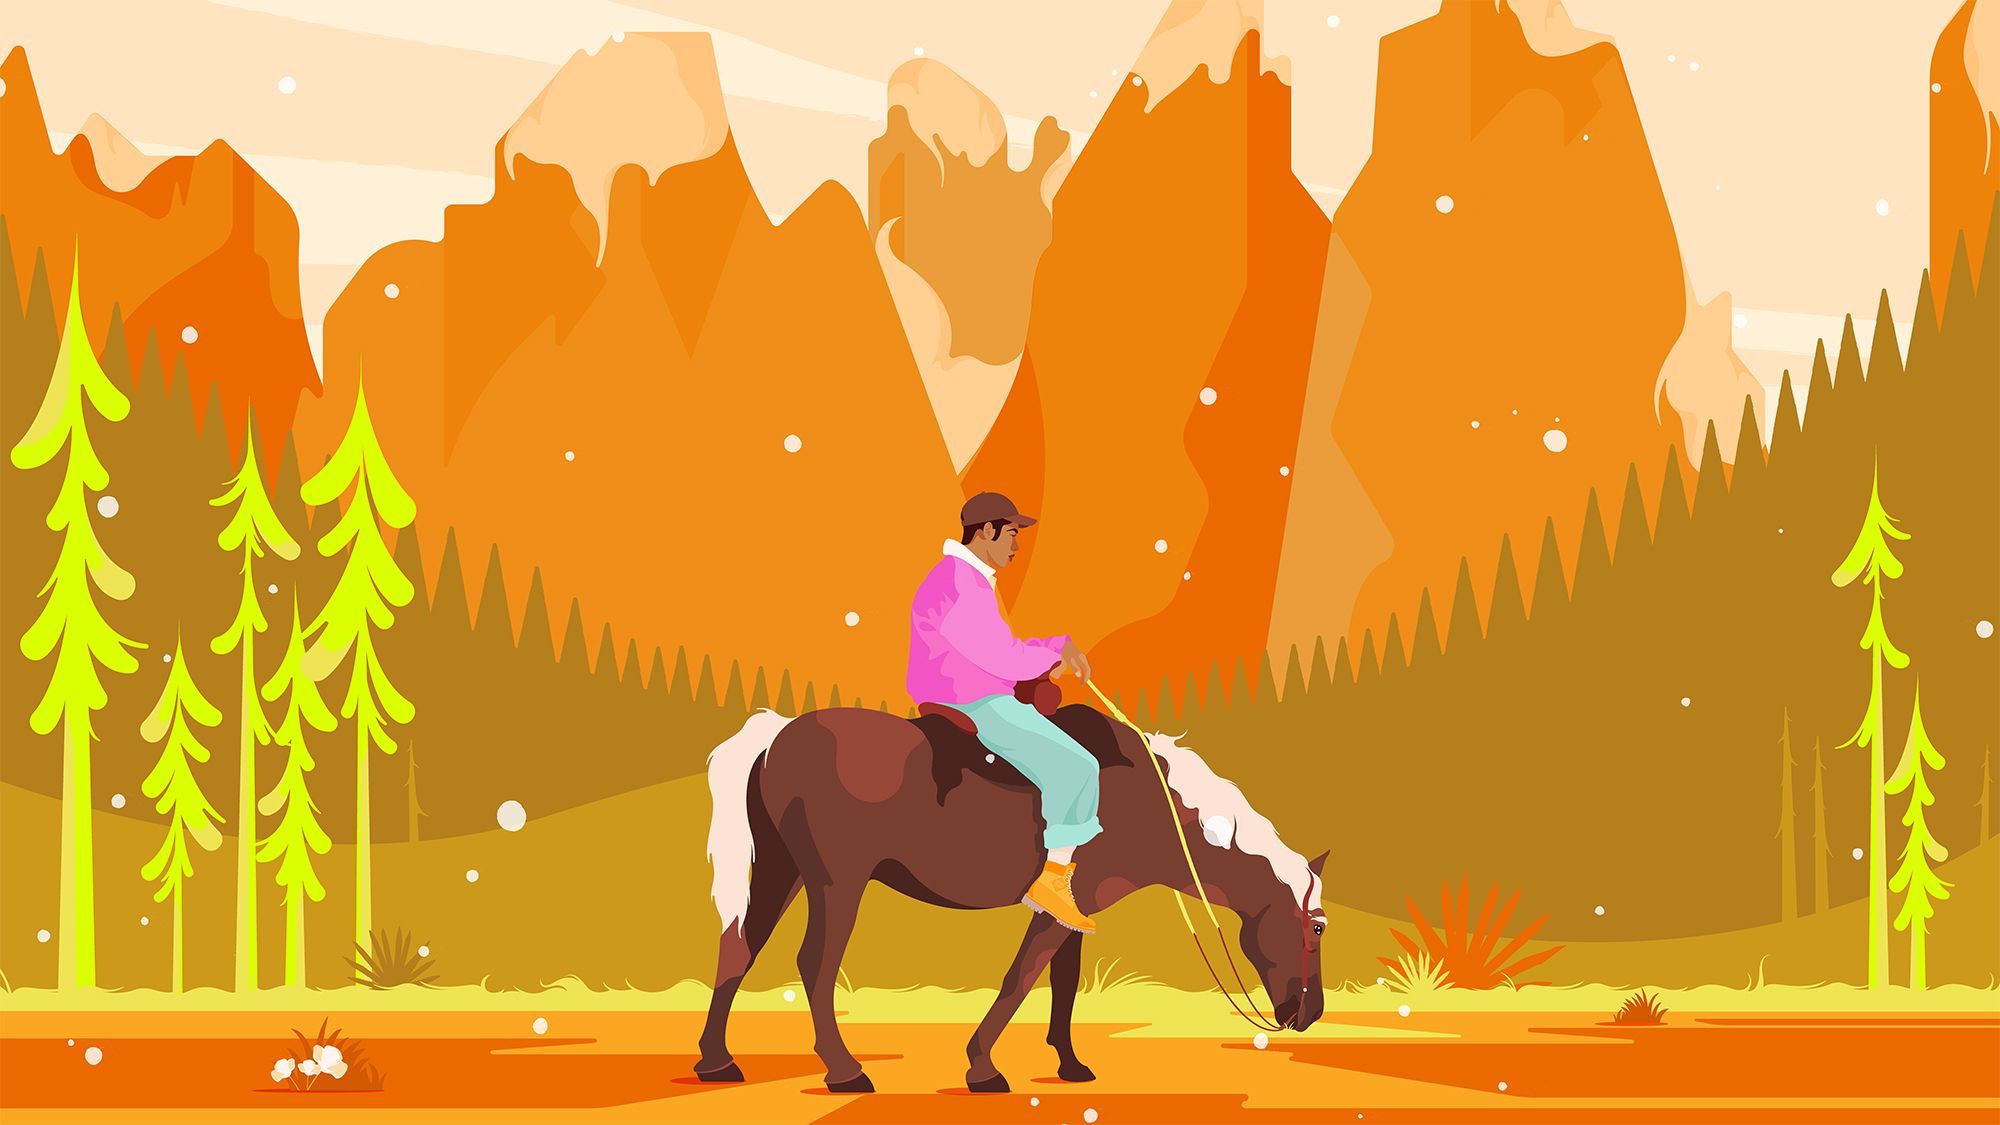 illustration using dark cheddar color shows man on horse in front of forest and mountains